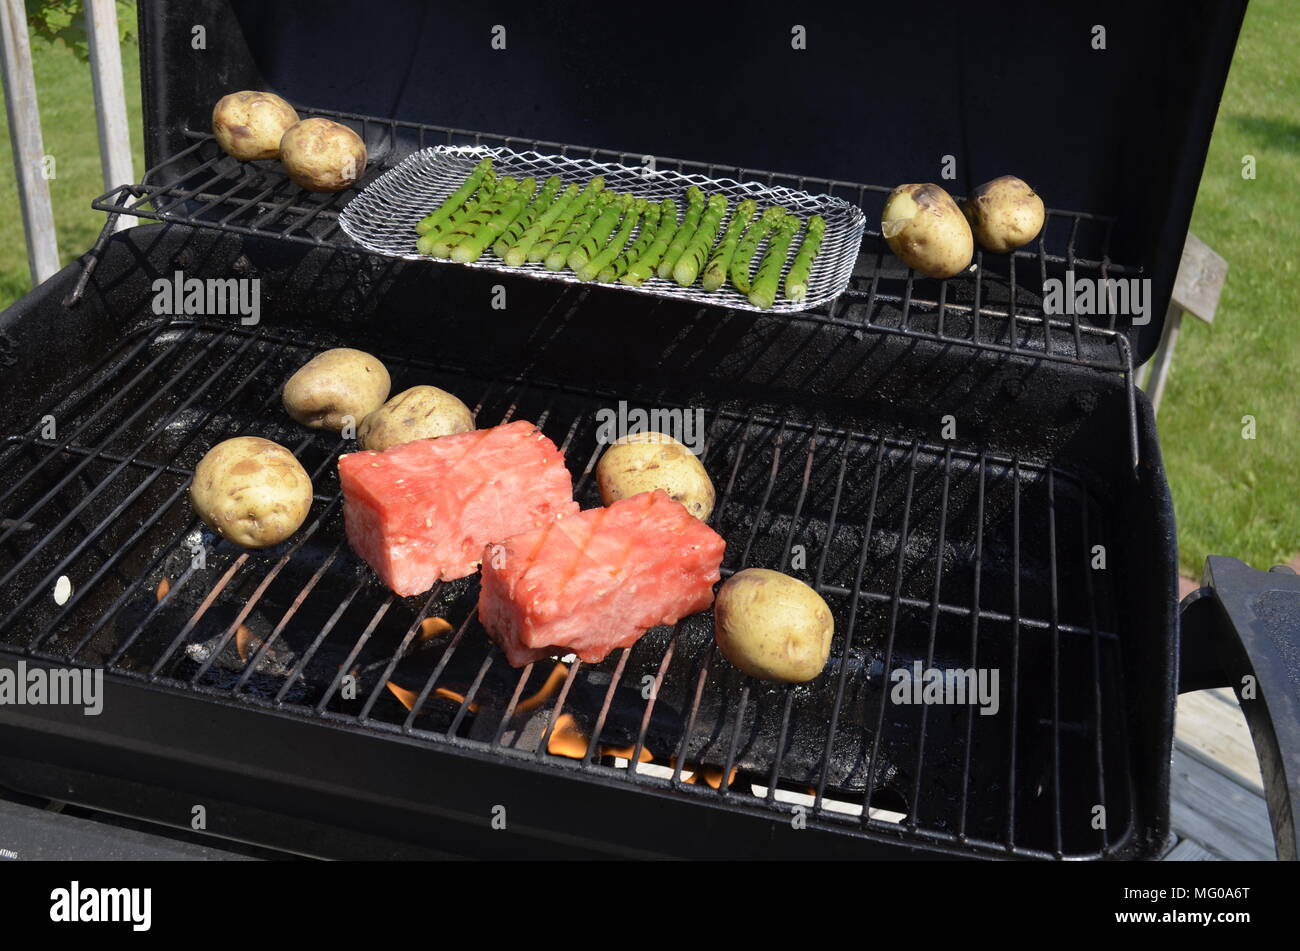 Watermelon, potatoes, and asparagus cooking on the outdoor backyard BBQ grill on a summer Sunday afternoon. Stock Photo